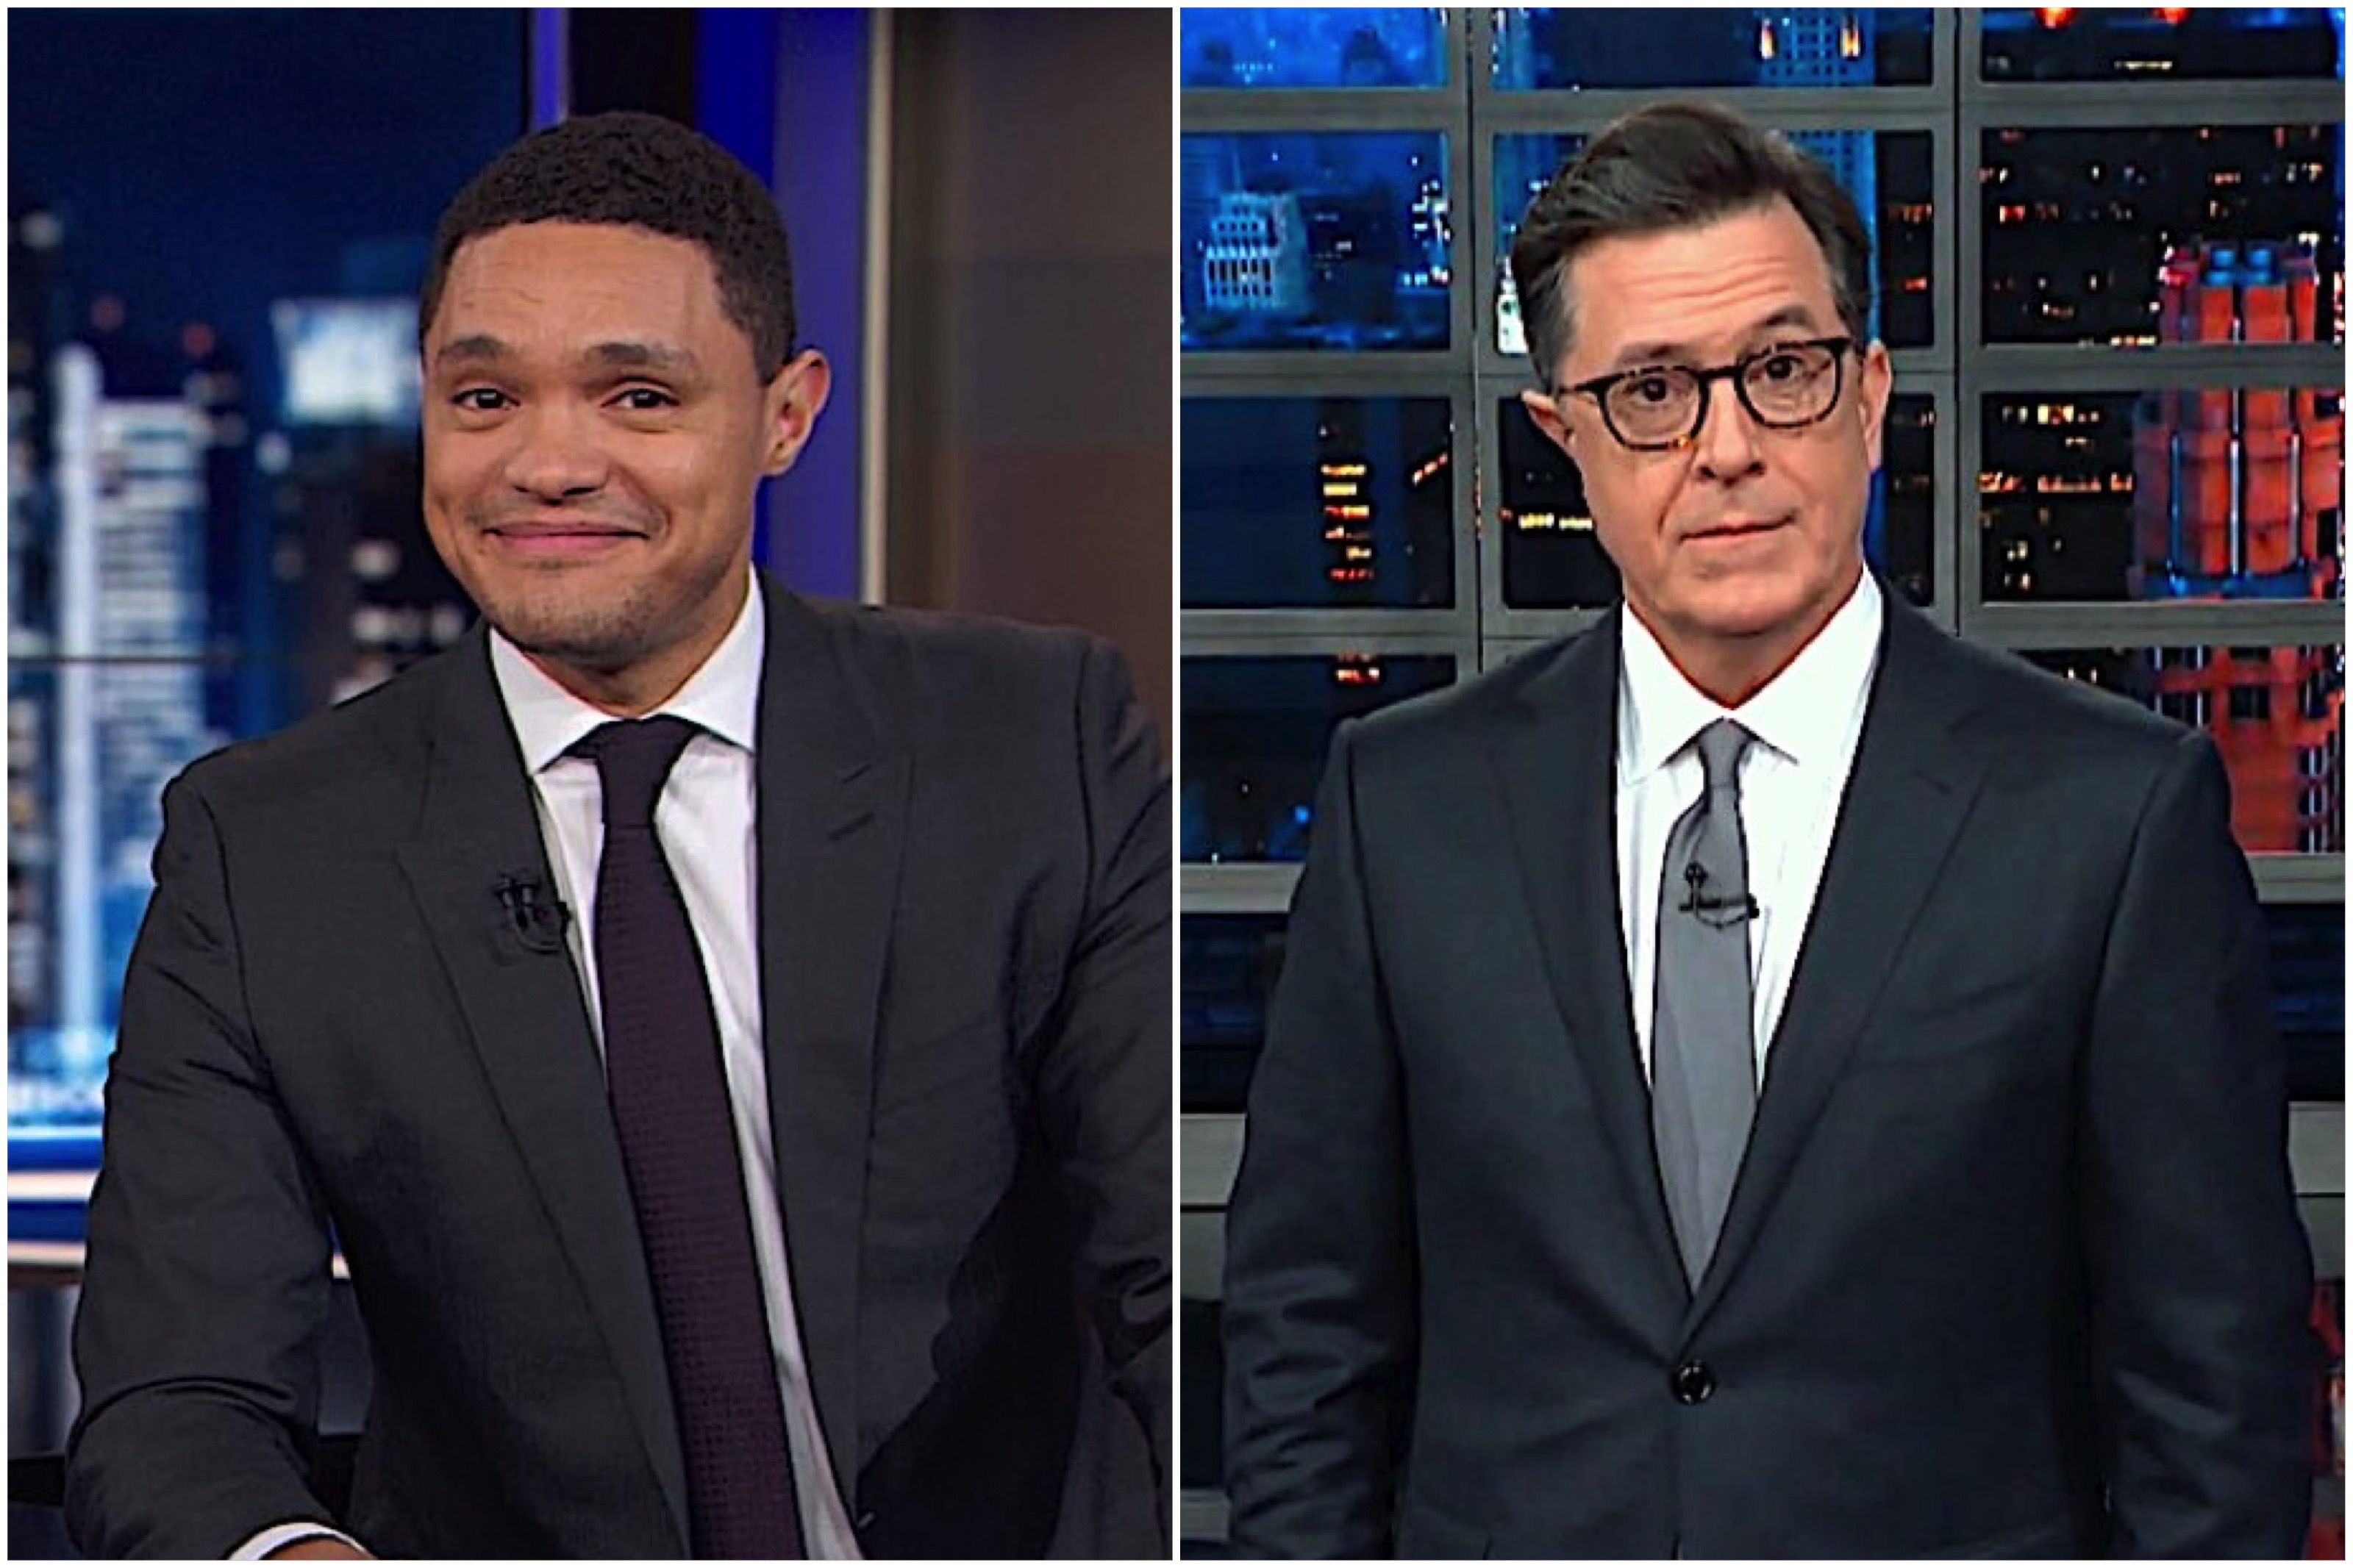 Trevor Noah and Stephen Colbert disagree about calling the border wall &quot;peaches&quot;